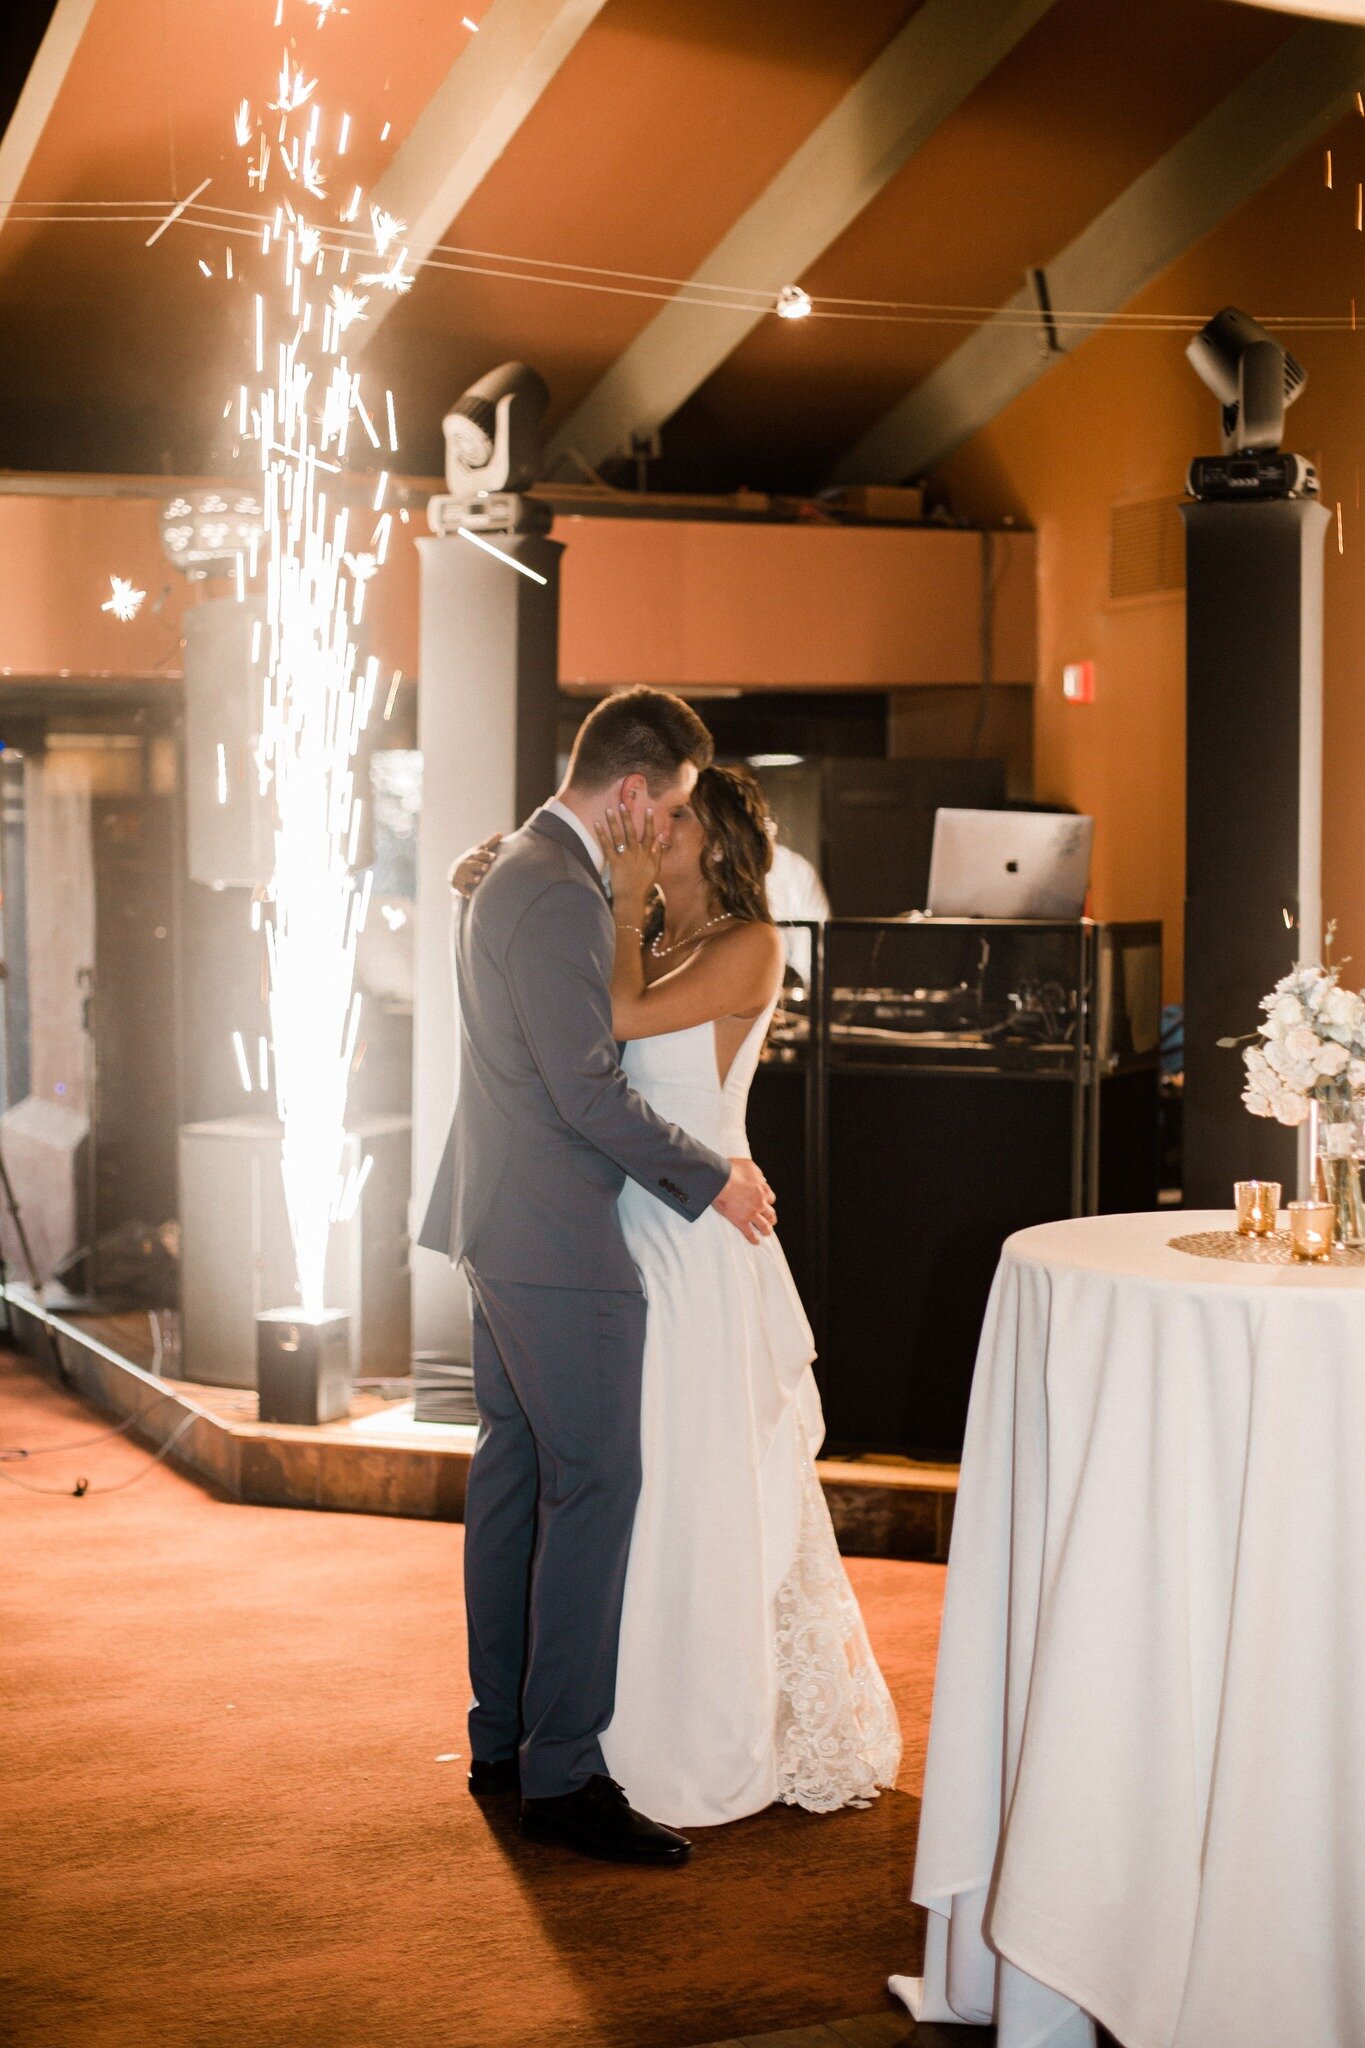 Do you want sparklers during your first dance? 

Our sparklers are customized to be cold to be safe inside and around guests. 

Check out our website for more information!